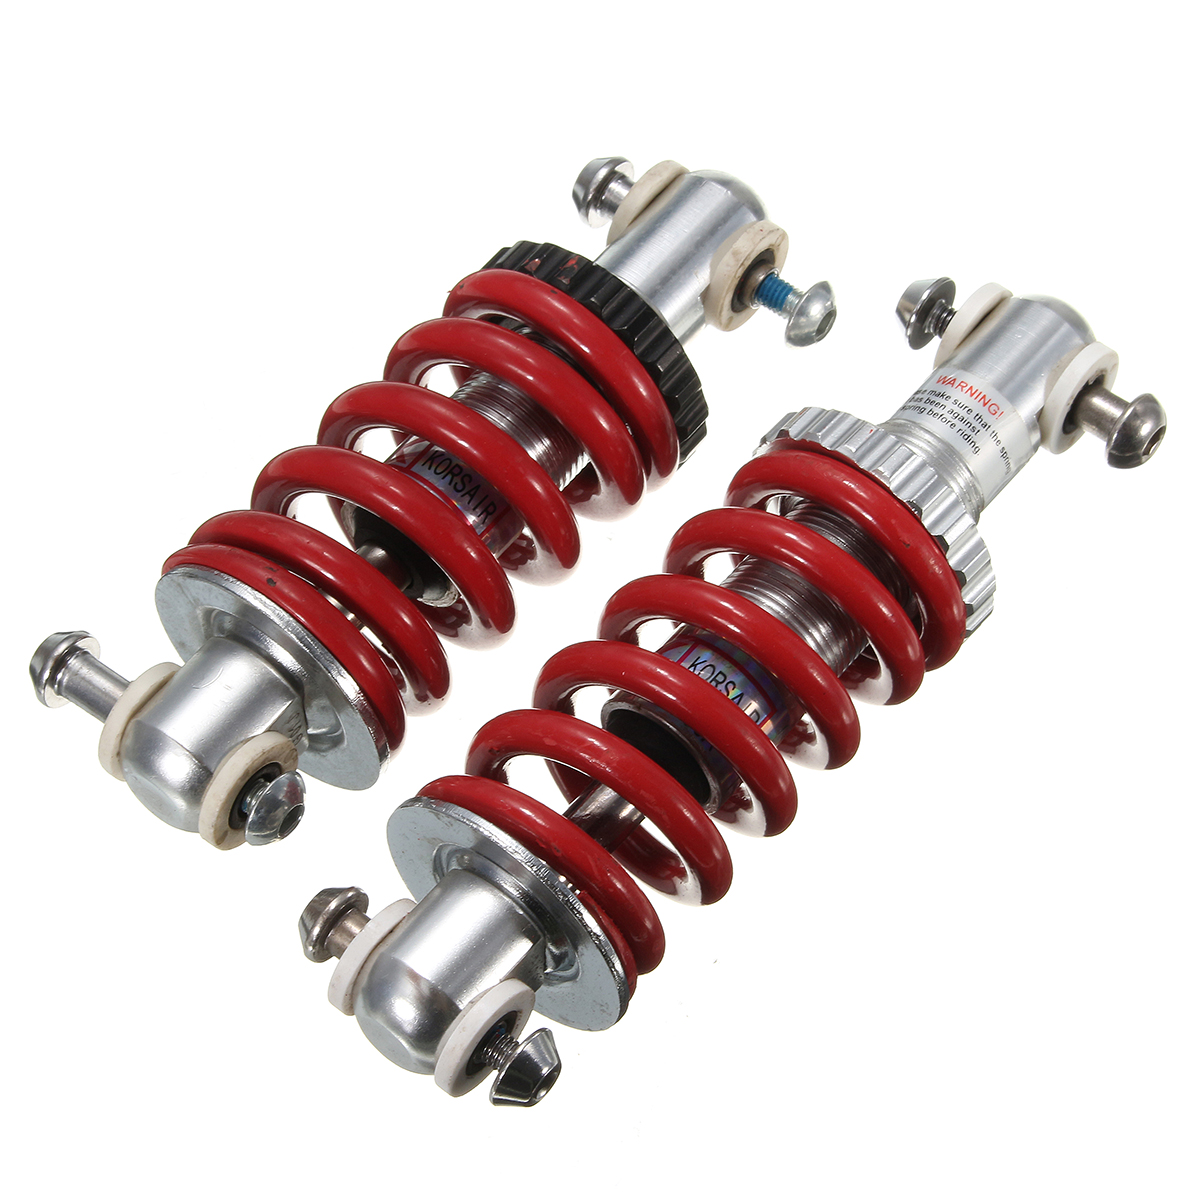 

BIKIGHT 650/750LBS/IN Mountain Bike Bicycle Rear Suspension Bumper Spring for Shock Absorber